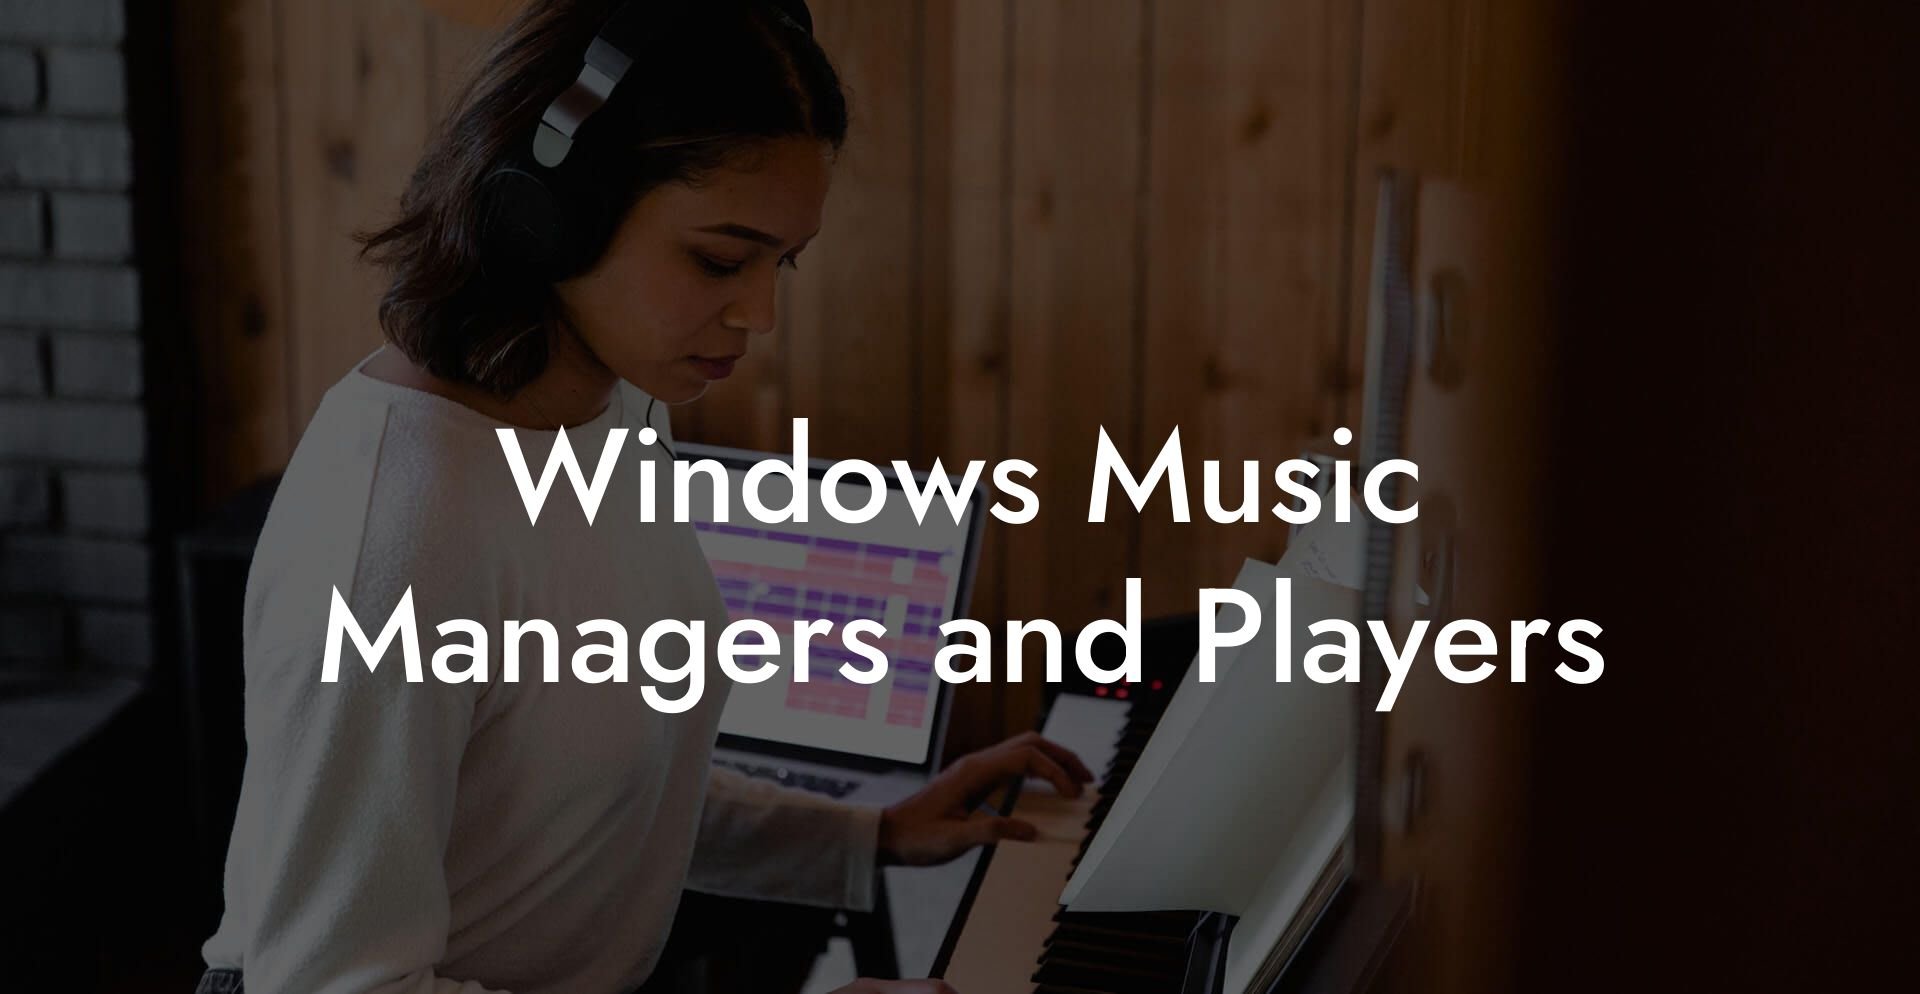 Windows Music Managers and Players